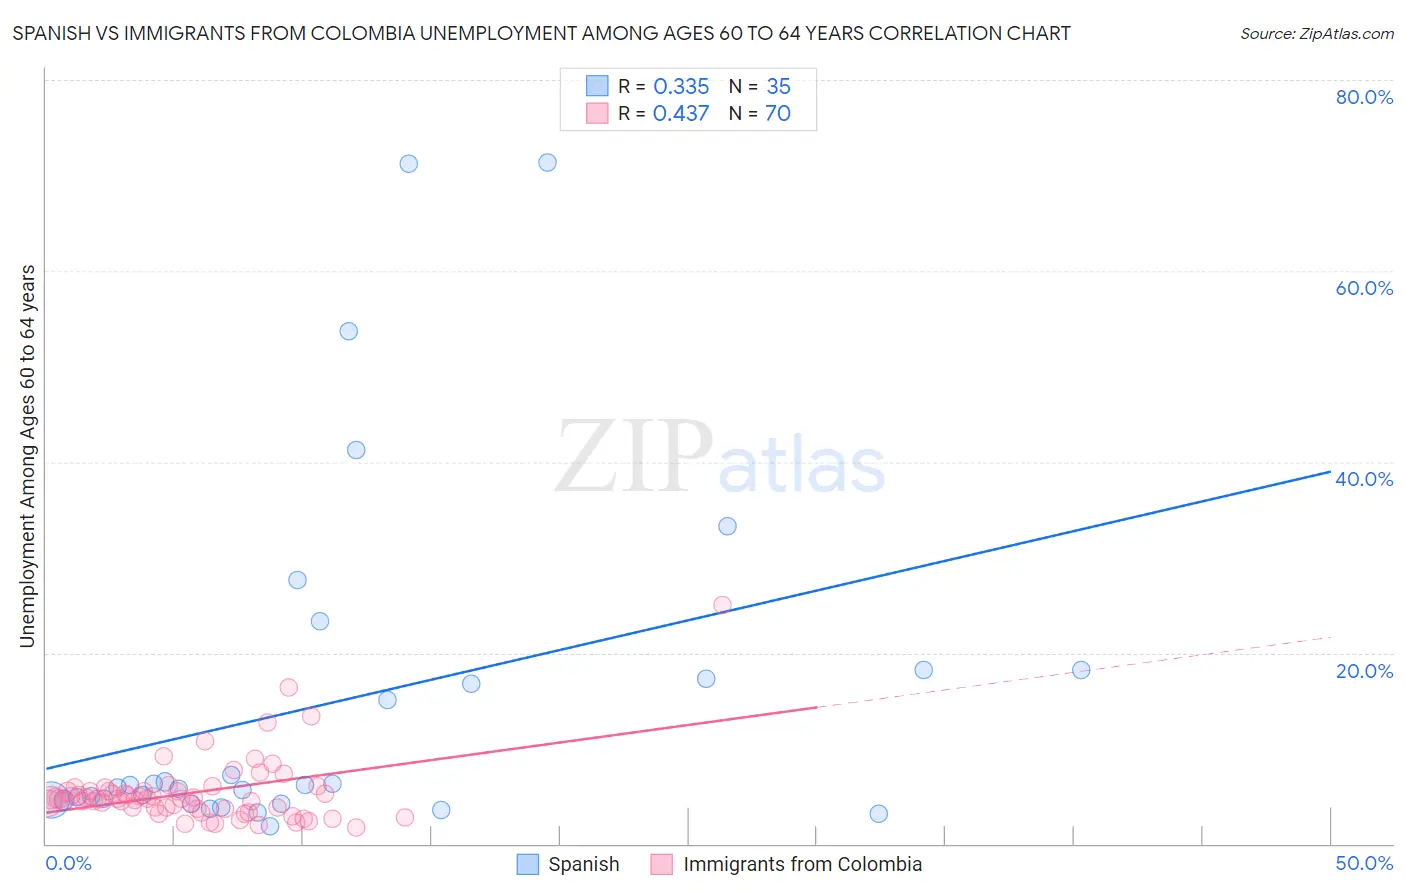 Spanish vs Immigrants from Colombia Unemployment Among Ages 60 to 64 years